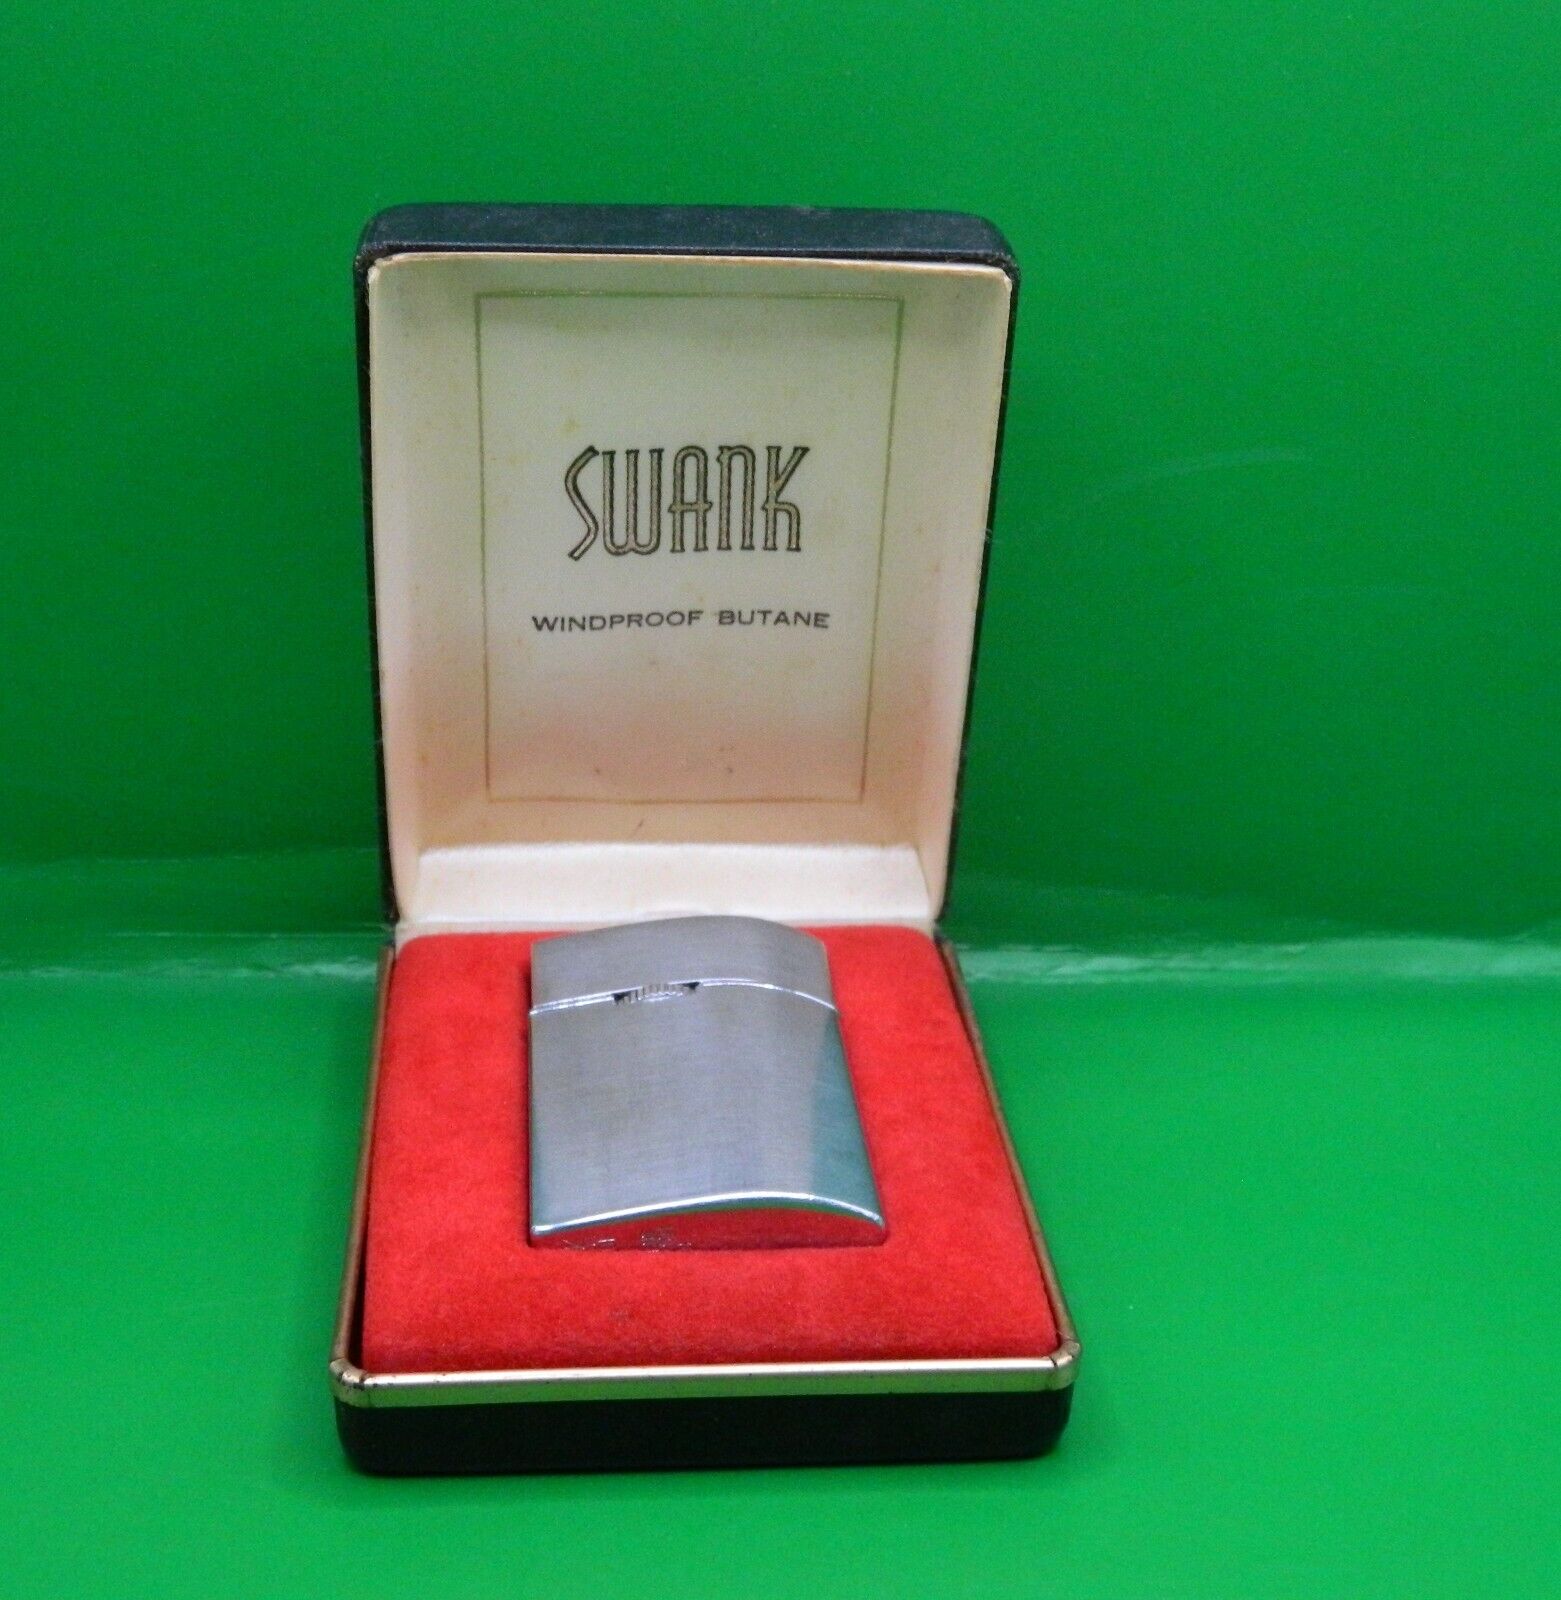 Vintage Swank Windproof Butane Flip-Top Lighter Made In Japan With Box. RARE